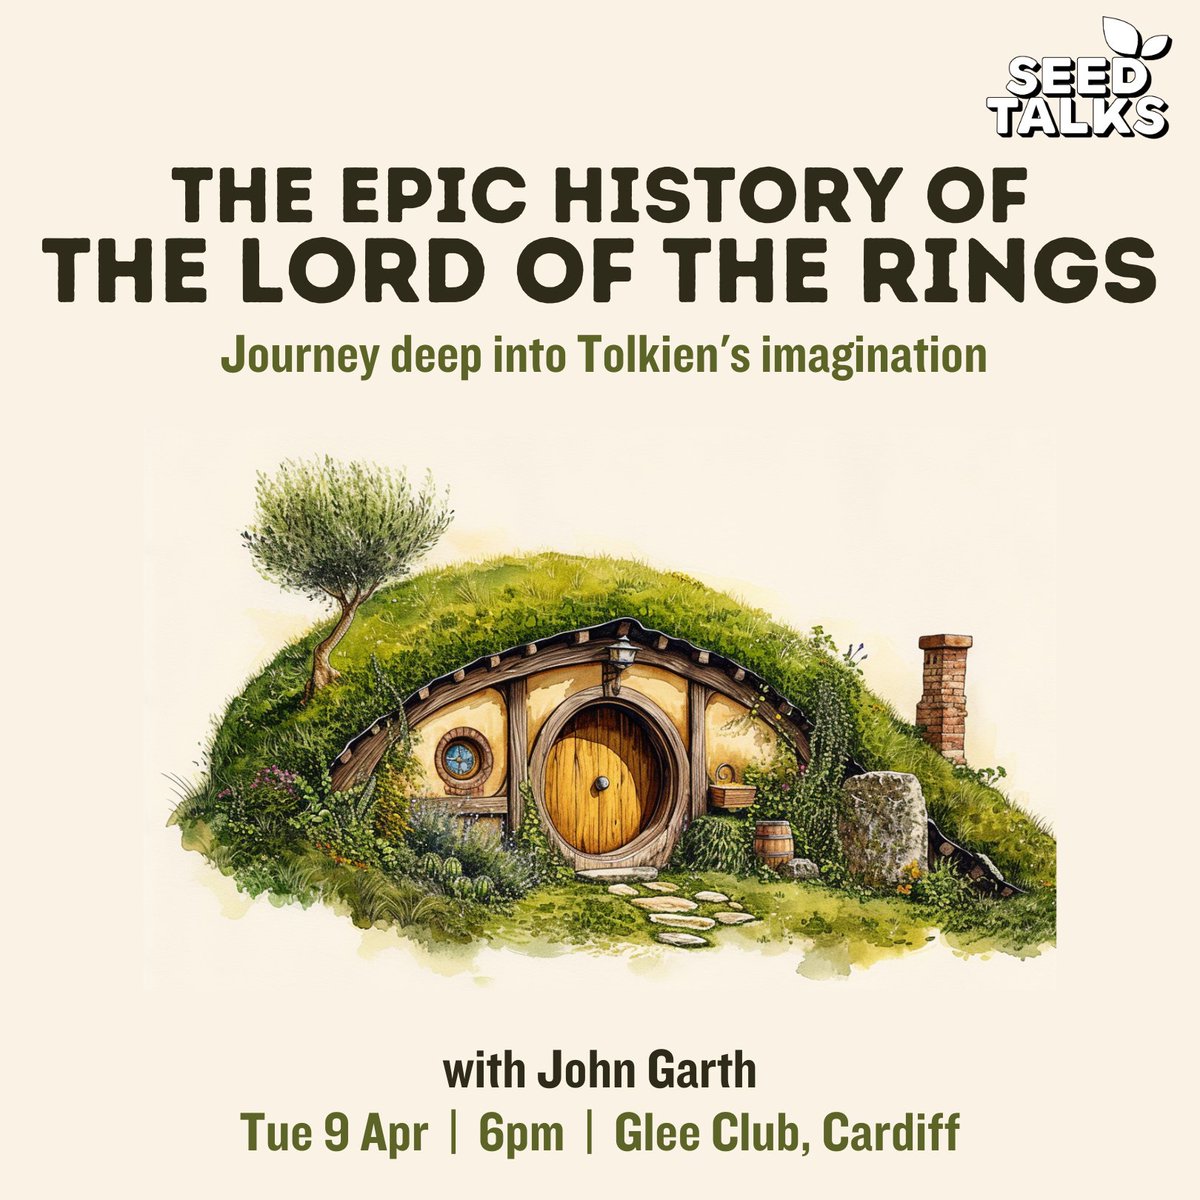 Coming up tonight! 🕕👇 @SeedTalks: The Epic History of The Lord of the Rings with John Garth Doors: 6pm Last entry: 6:30pm Approx finish: 9pm 🎟️ Tickets can be purchased on the door or in advance from bit.ly/SeedTalksCardi…